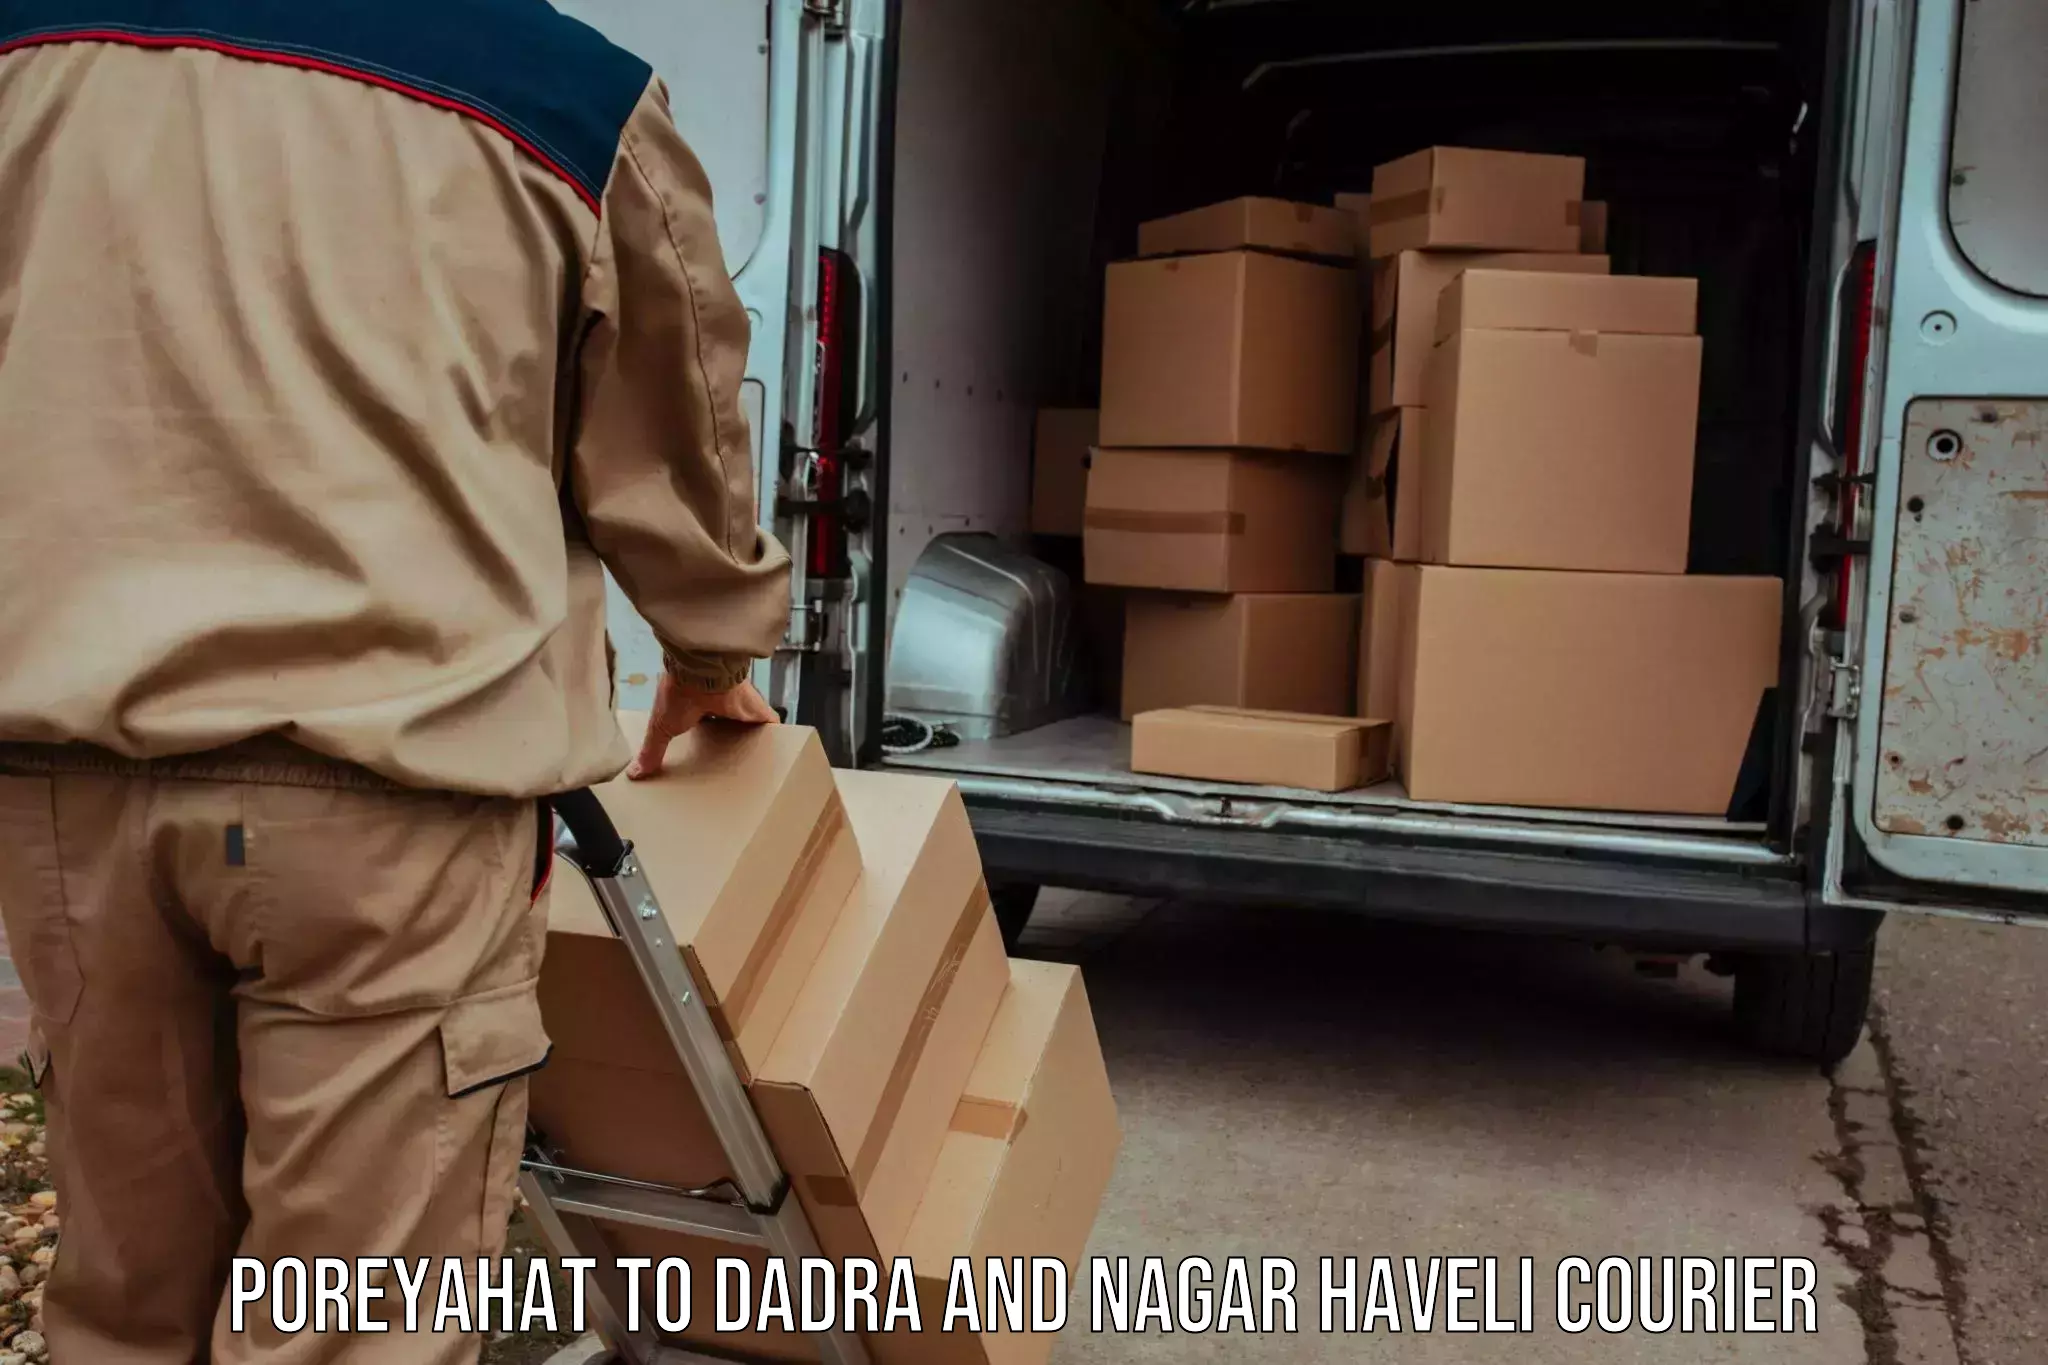 Reliable courier service in Poreyahat to Dadra and Nagar Haveli